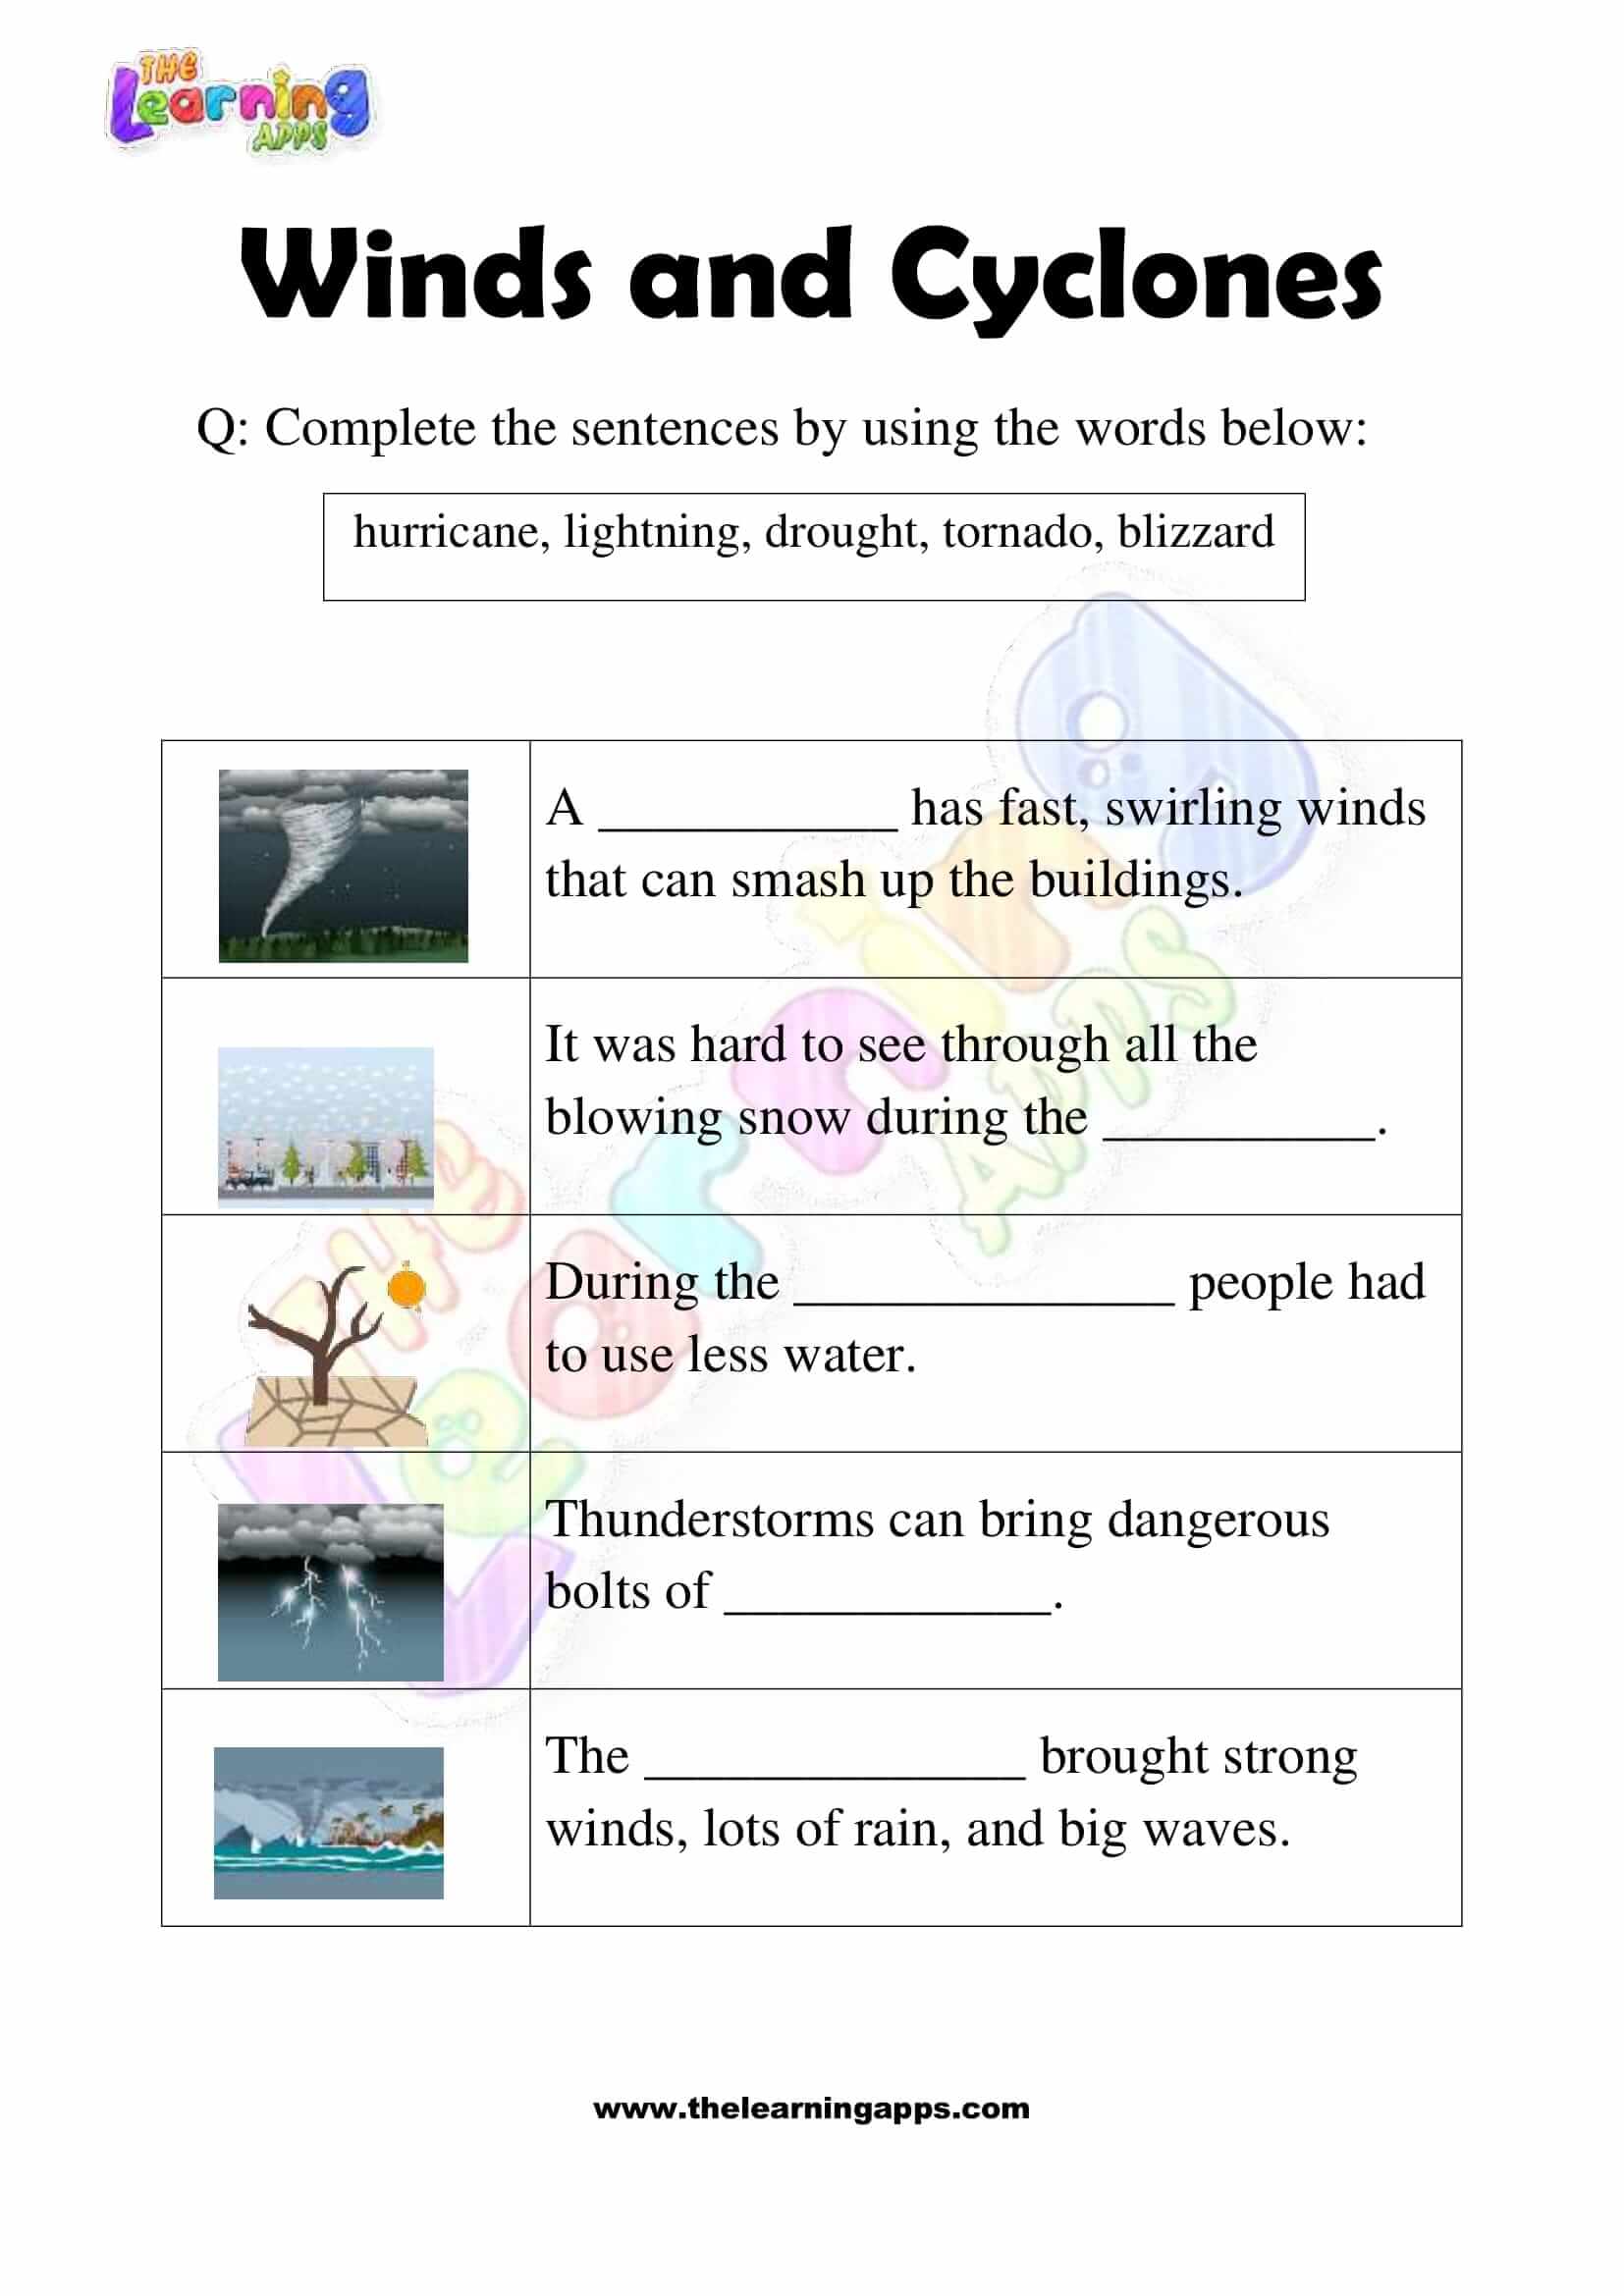 Winds and Cyclones - Grade 2 - Activity 9